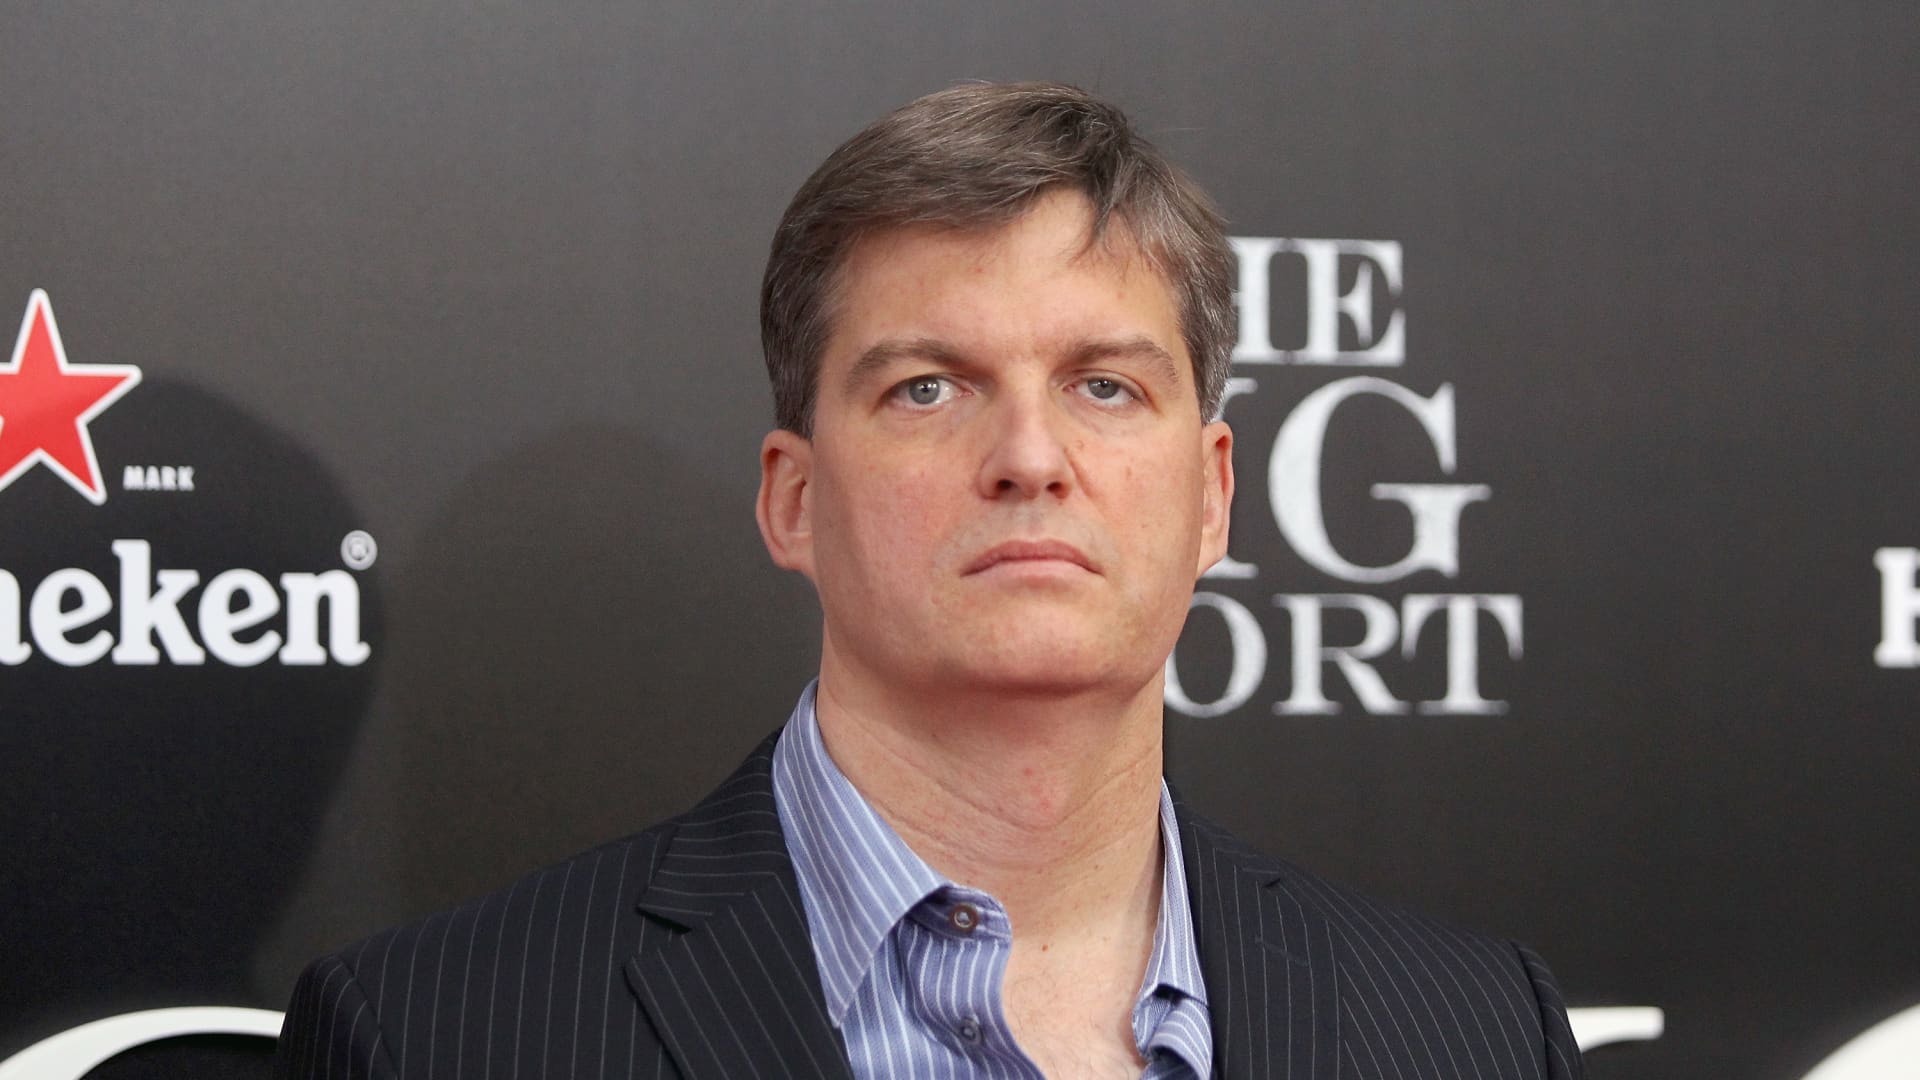 Michael Burry of ‘The Big Short’ dumps all his previous stock holdings and adds just one name